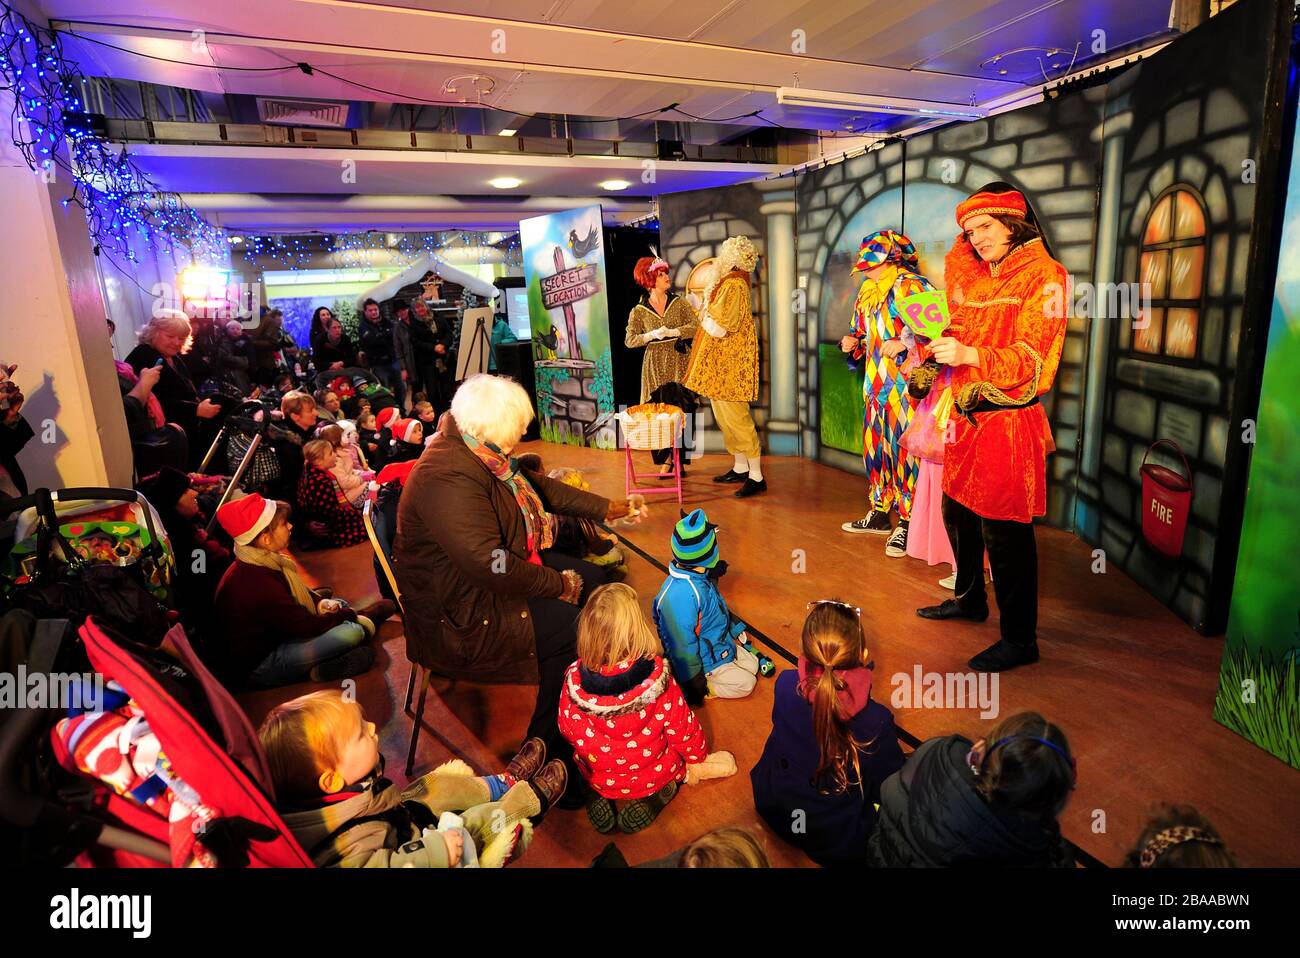 Performers during the Sleep Beauty Pantomime at Sandown Park. Stock Photo